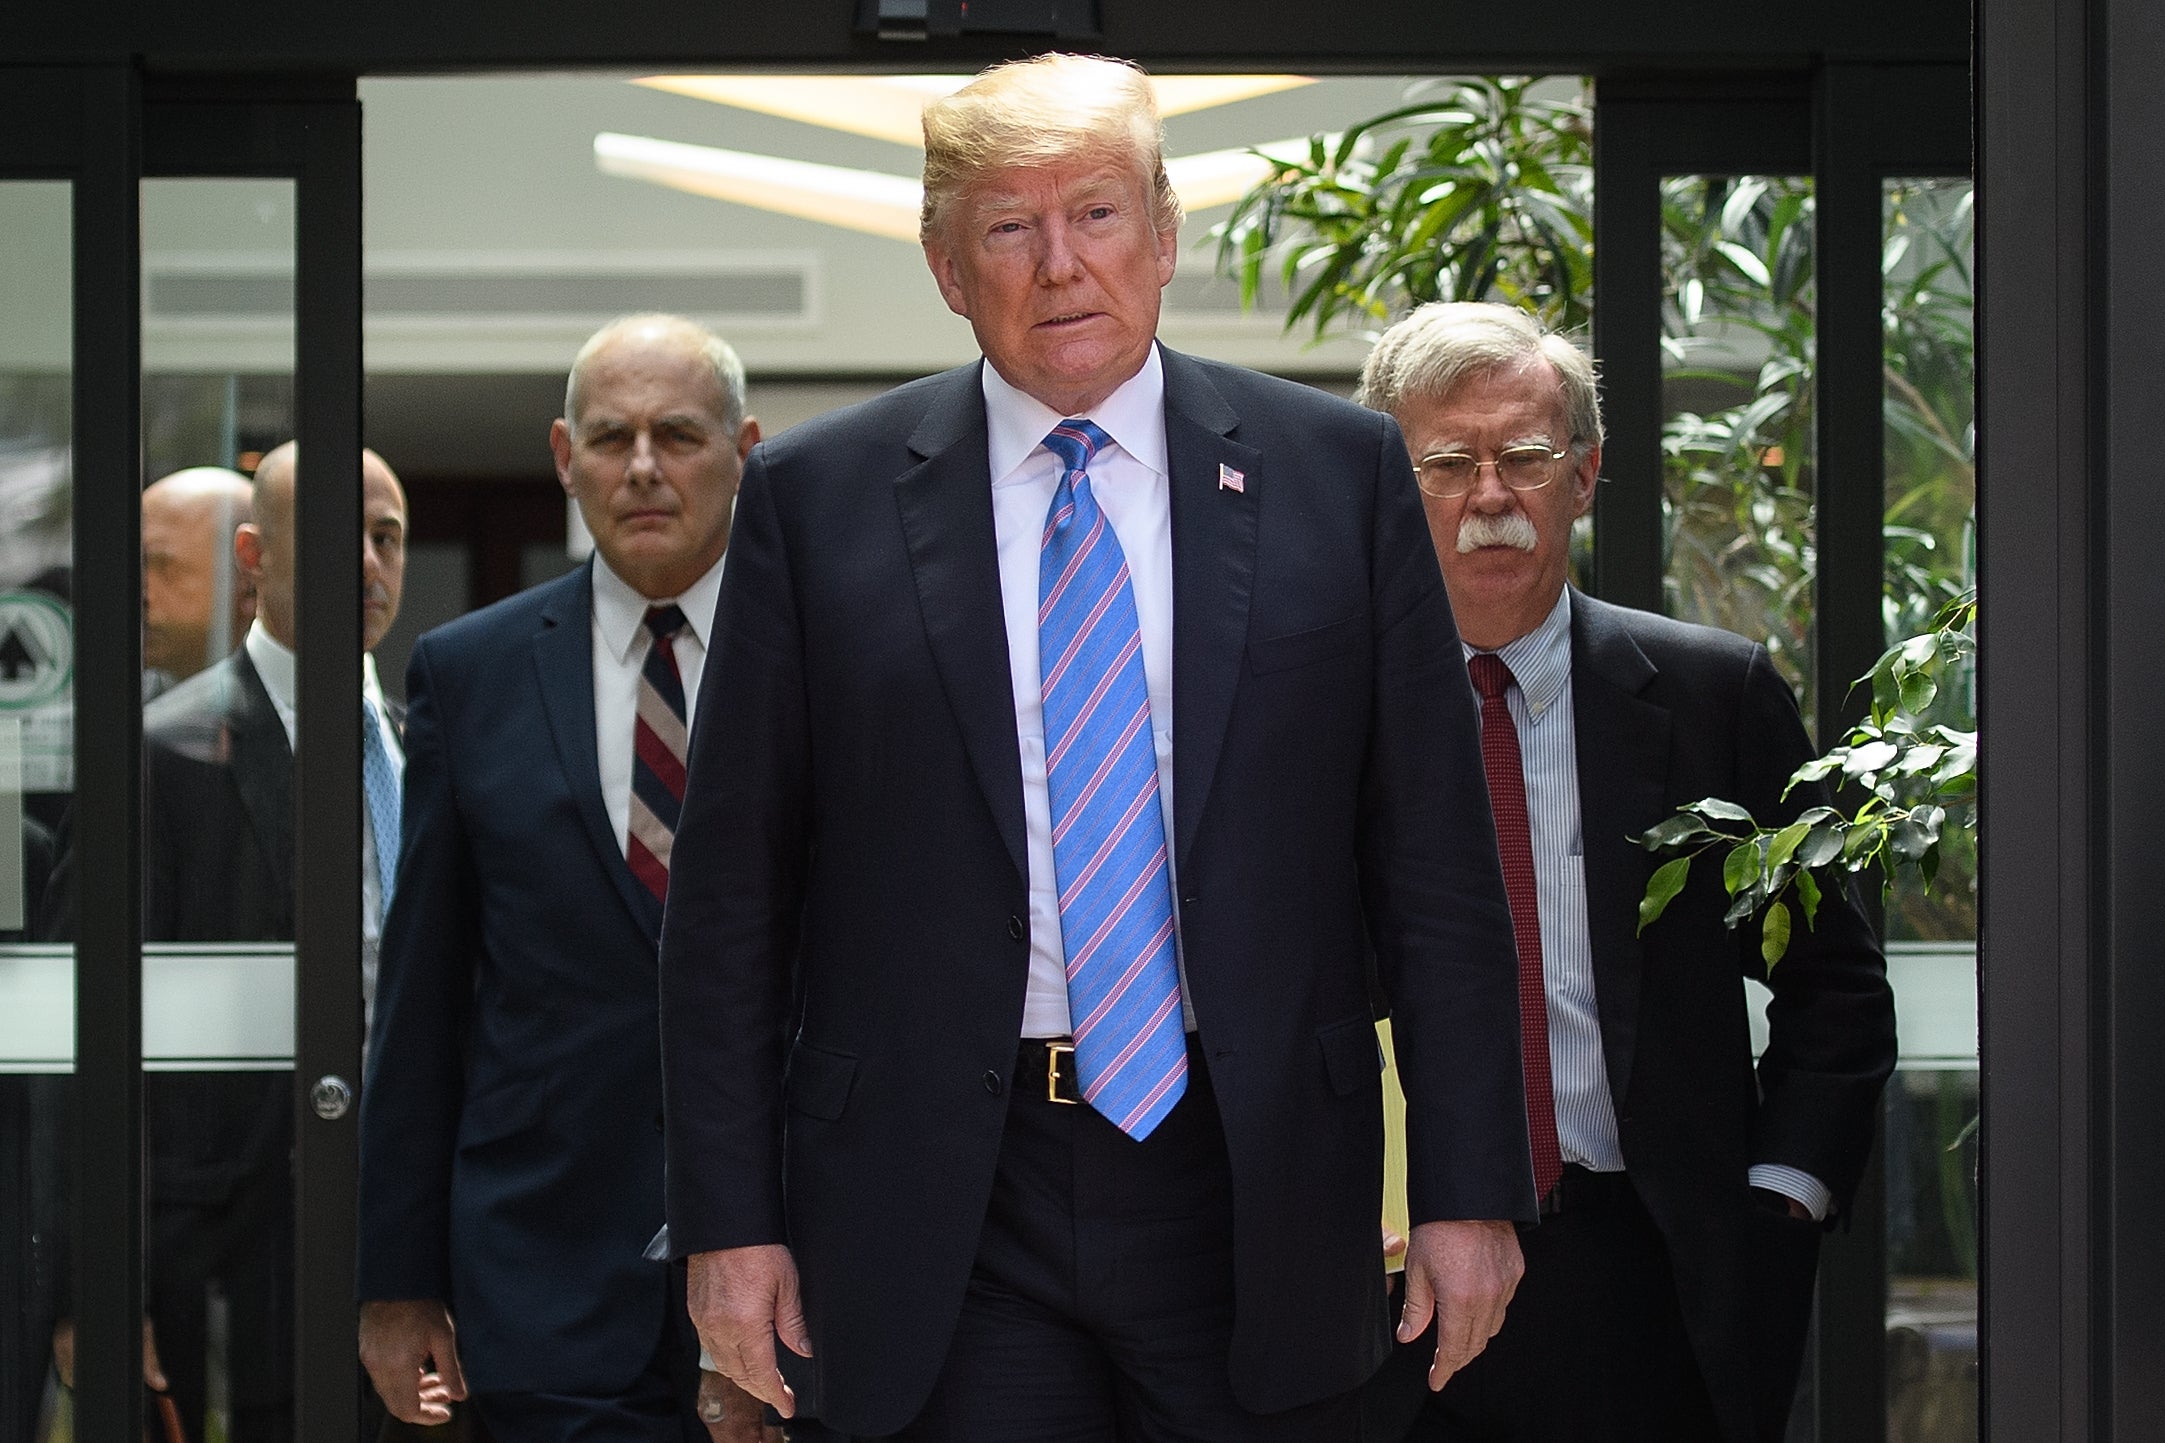 US President Donald Trump leaves with Chief of Staff John Kelly and National Security Advisor John Bolton after a press conference at the G7 Summit